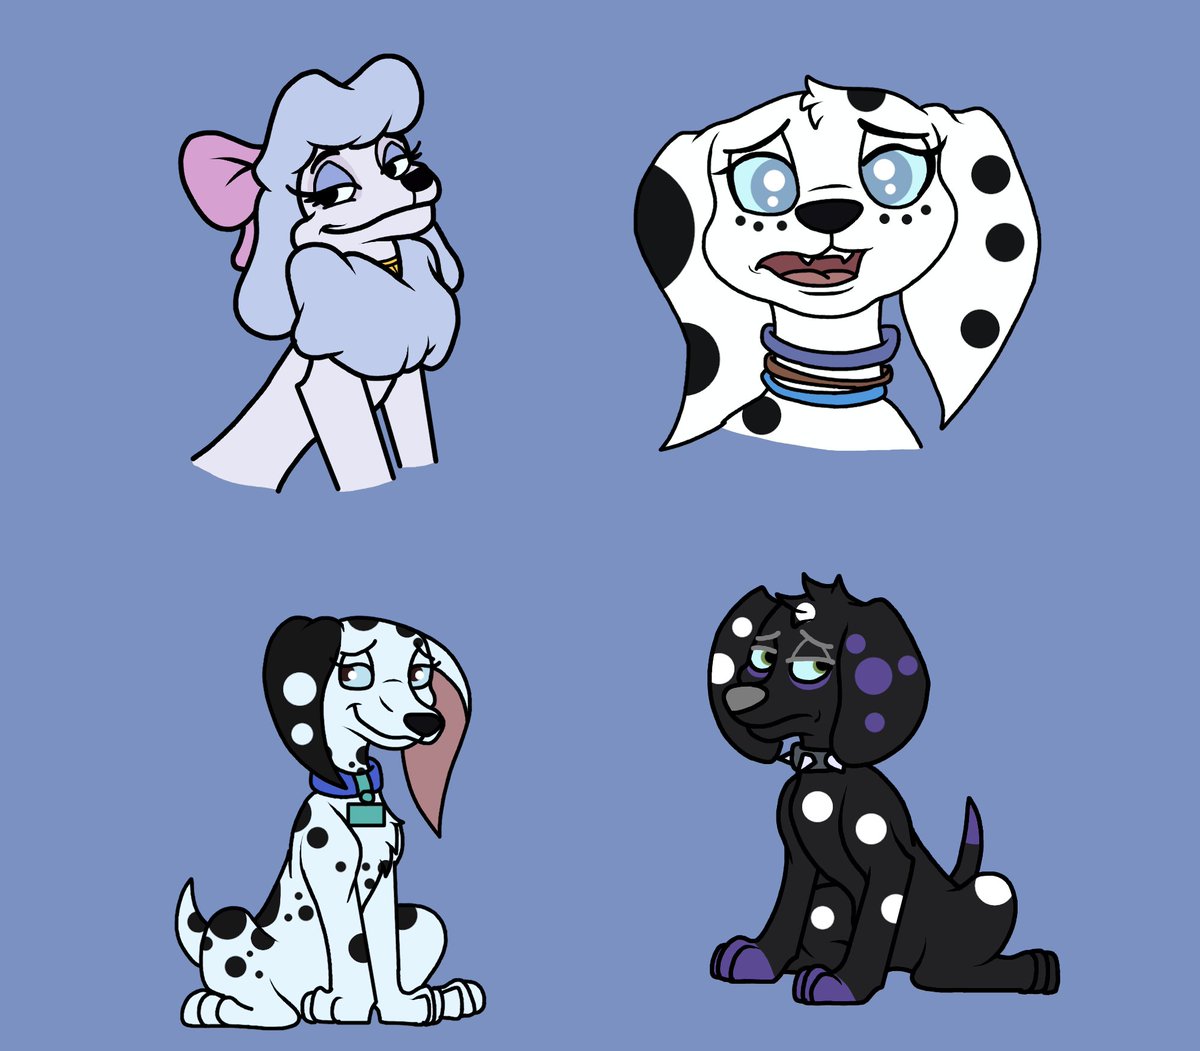 #101DalmatianStreet Just some quick doodles i colored in, also Georgette cameo.